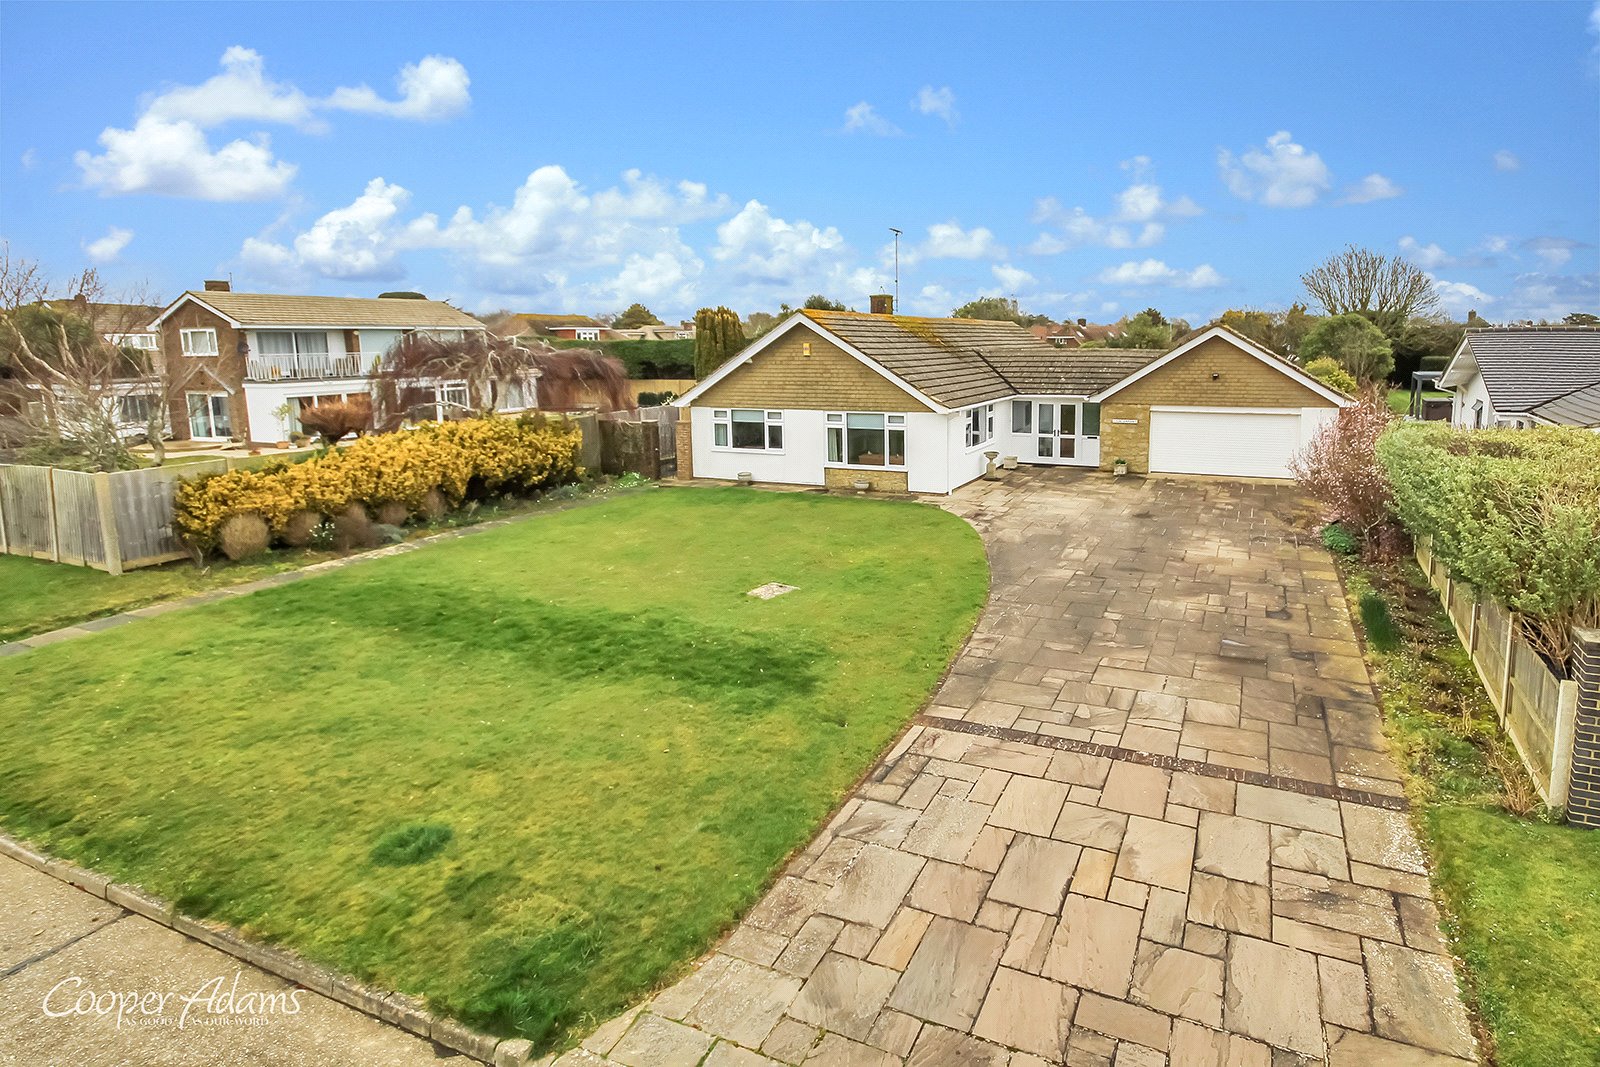 3 bed bungalow for sale in Selborne Way, East Preston - Property Image 1